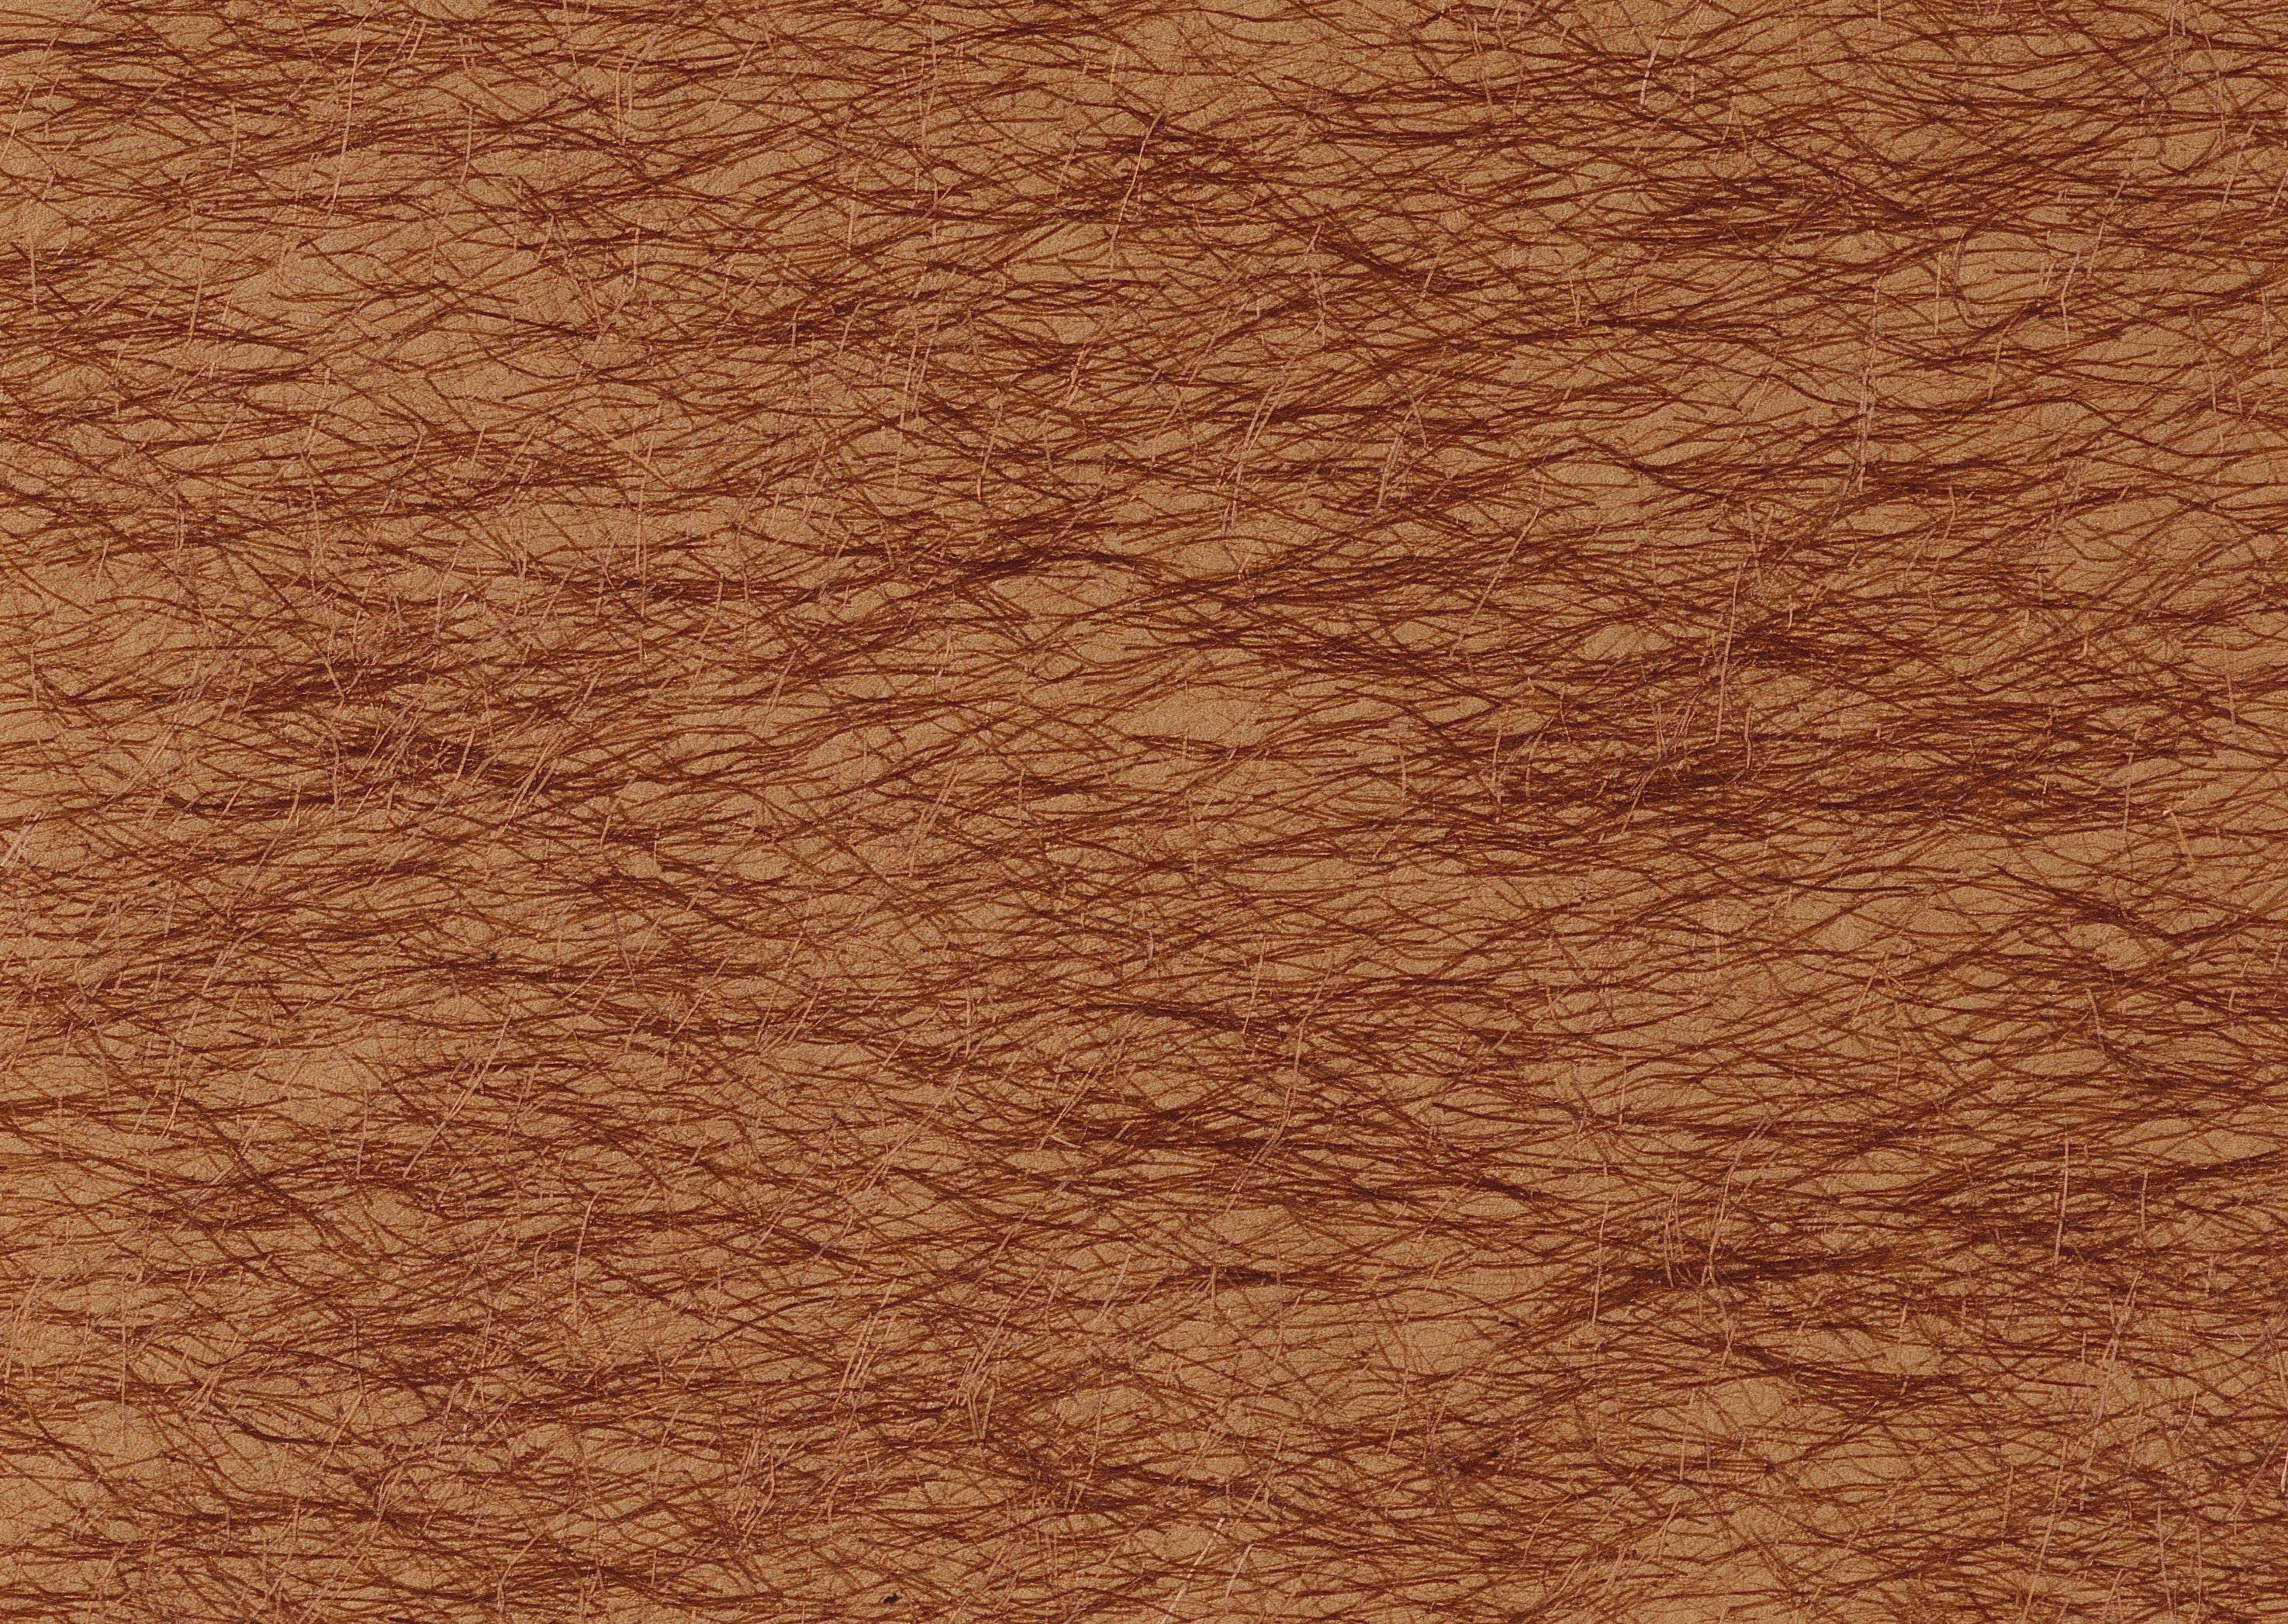 Free stock photo of fabric brown texture